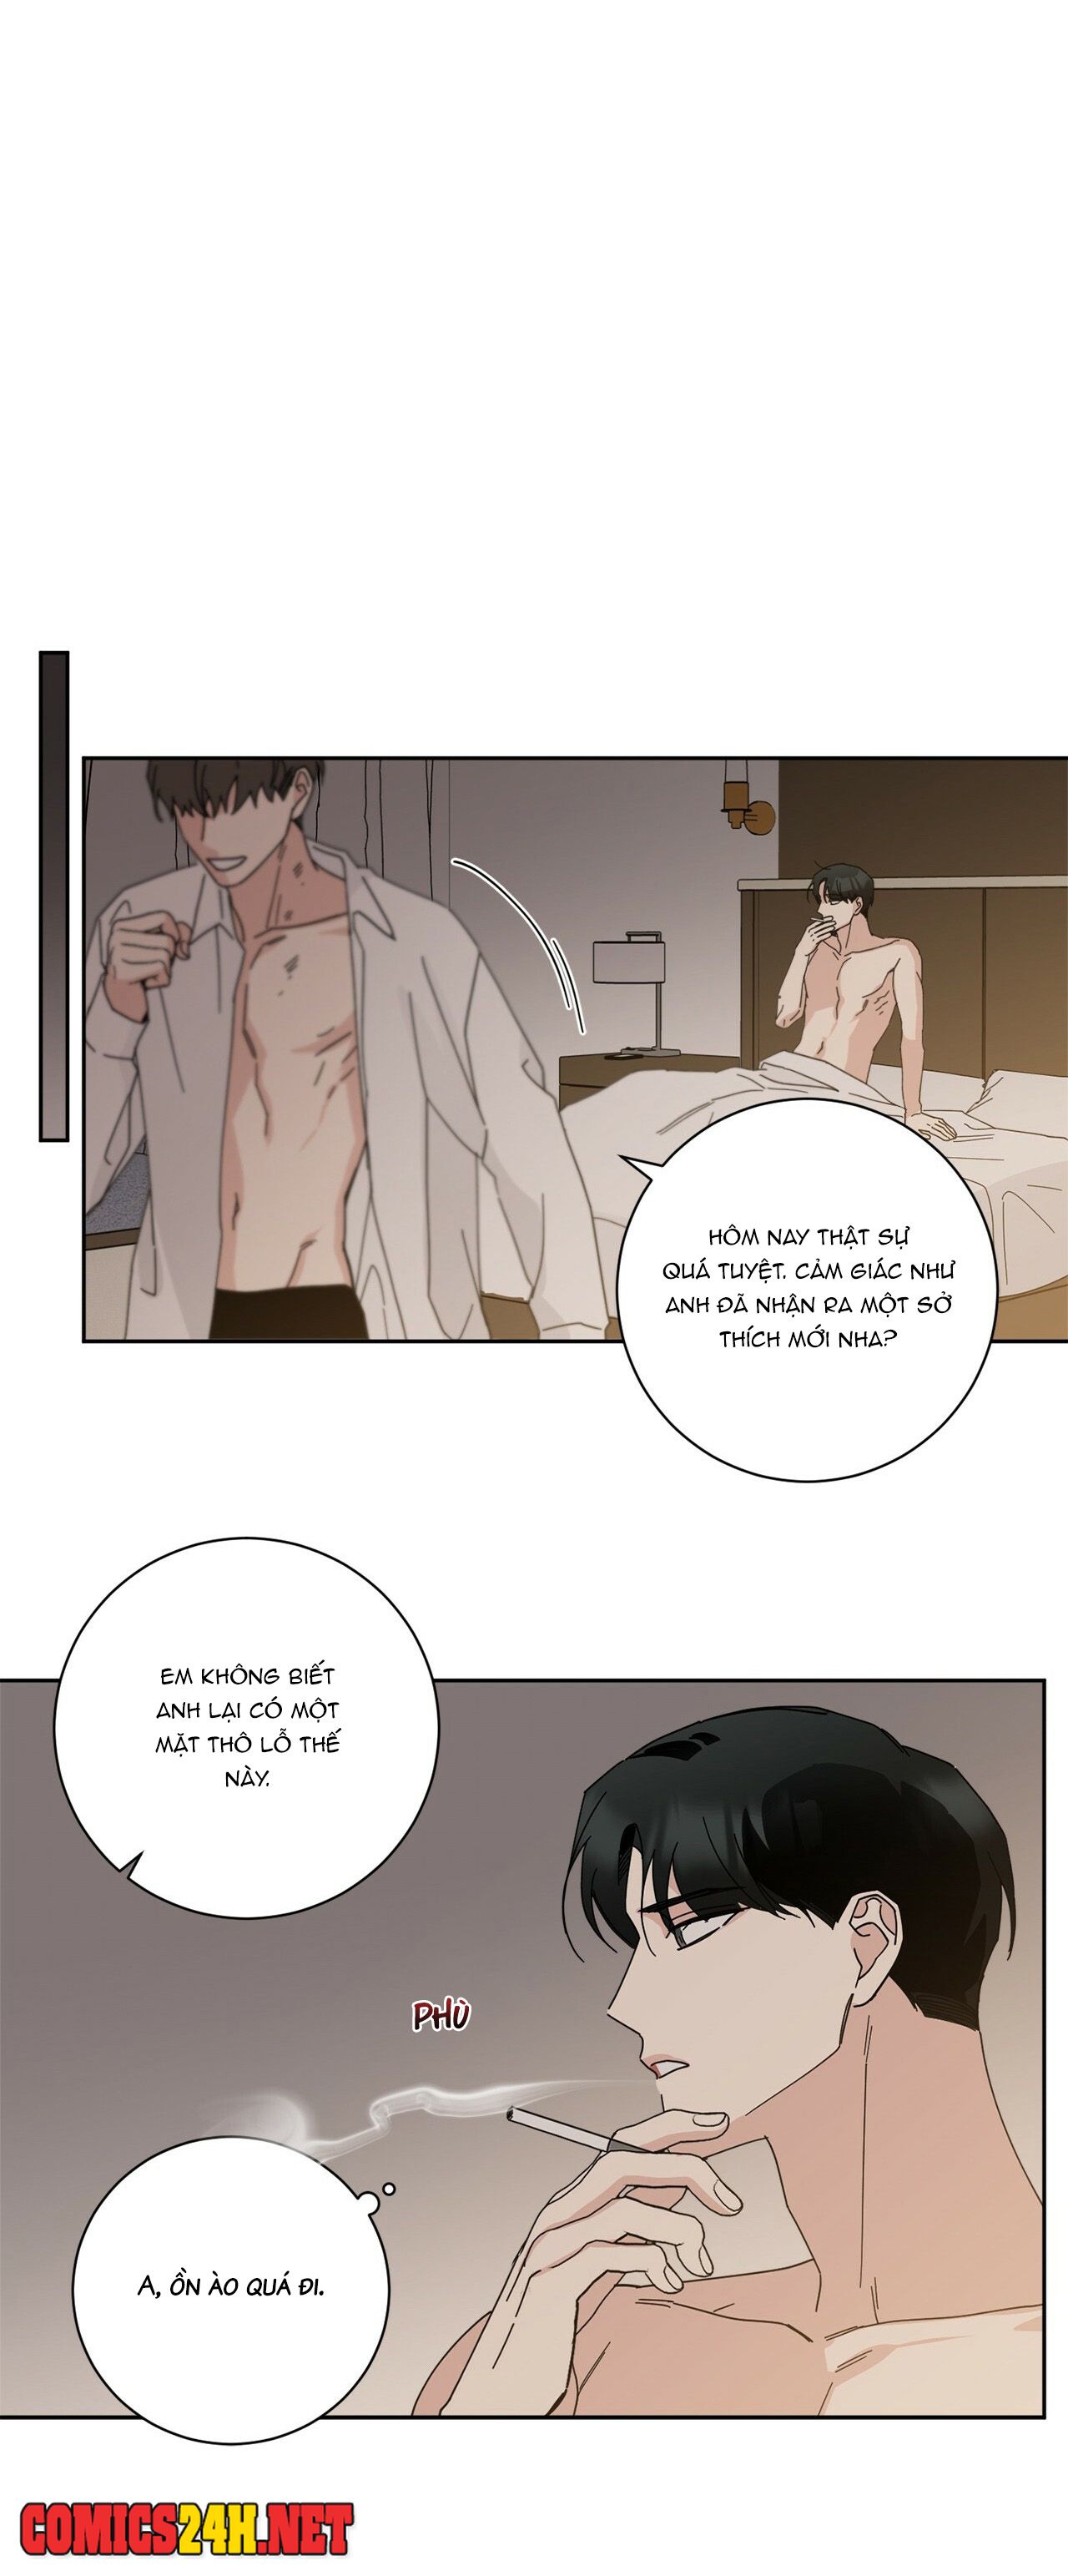 Home Five Chapter 2 - Trang 58